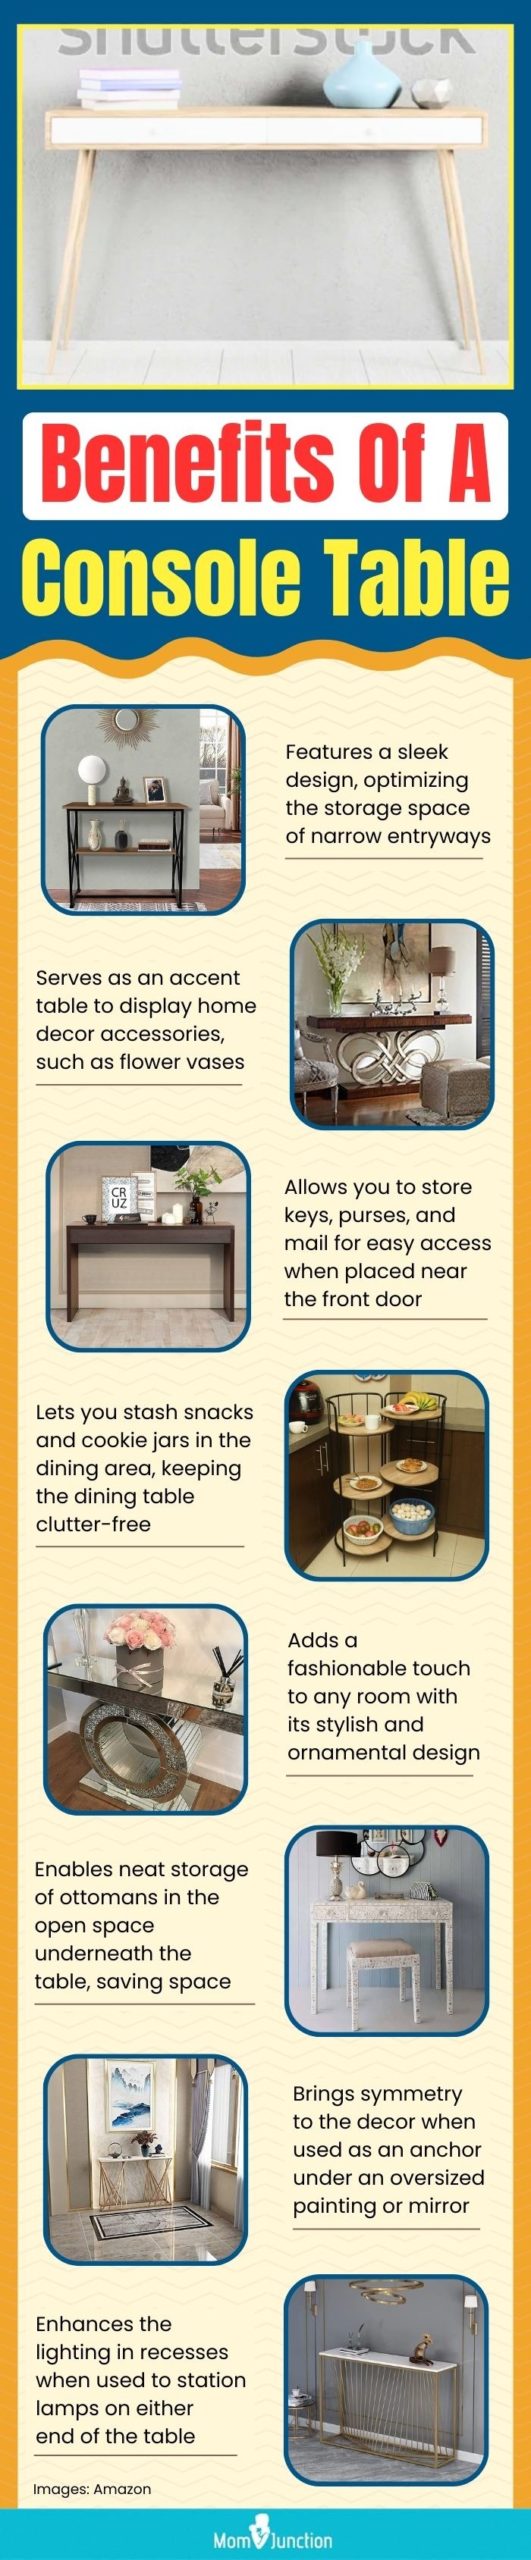 Benefits Of A Console Table (infographic)